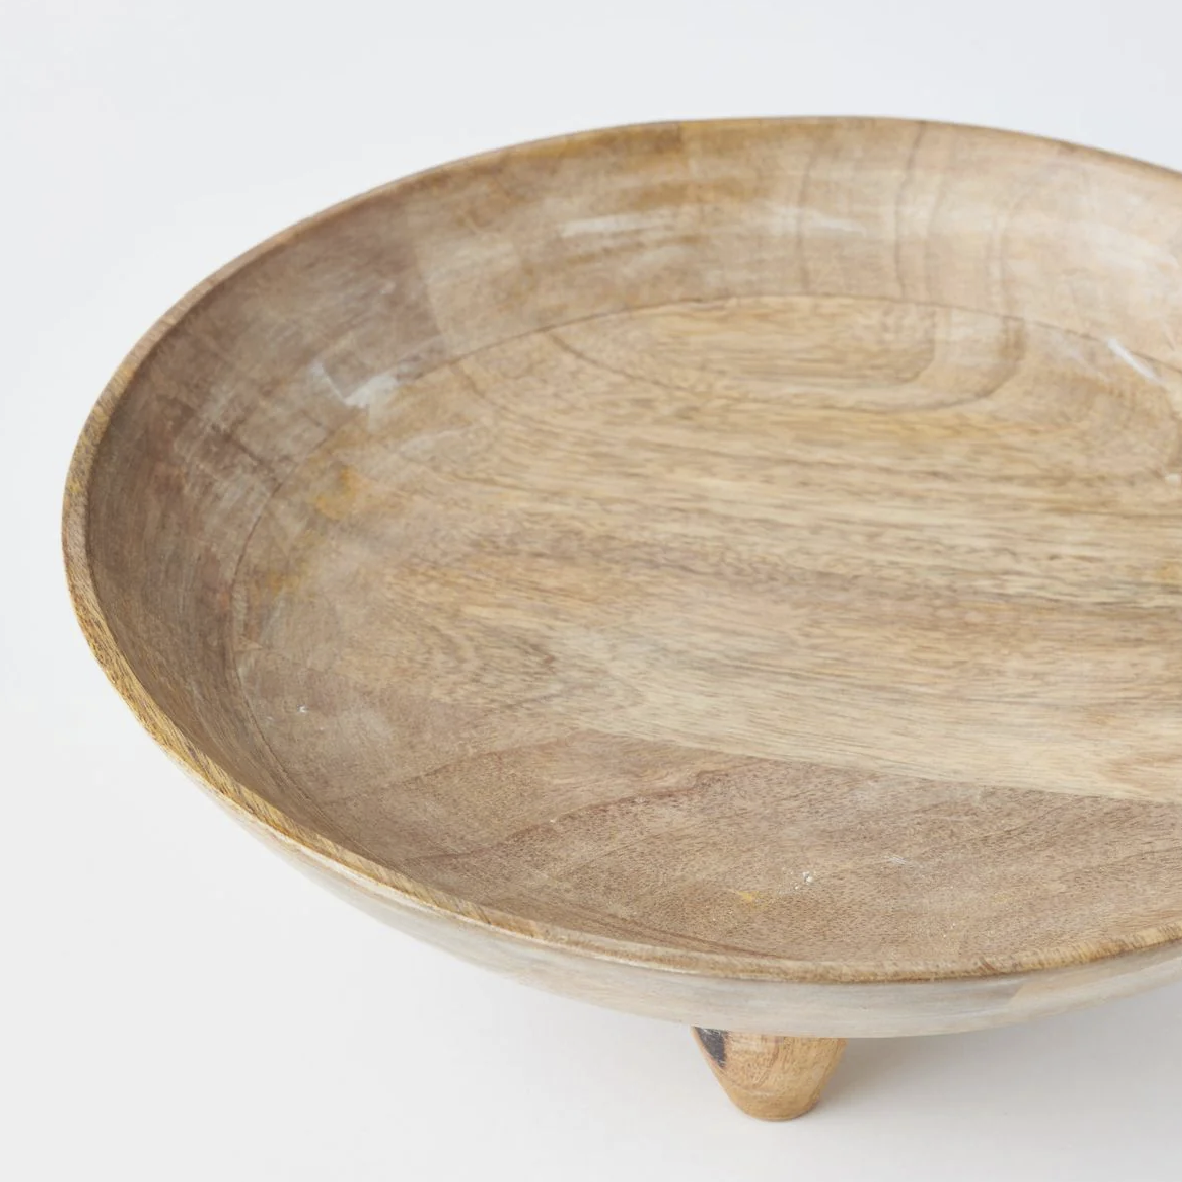 Three-Footed Wooden Bowl